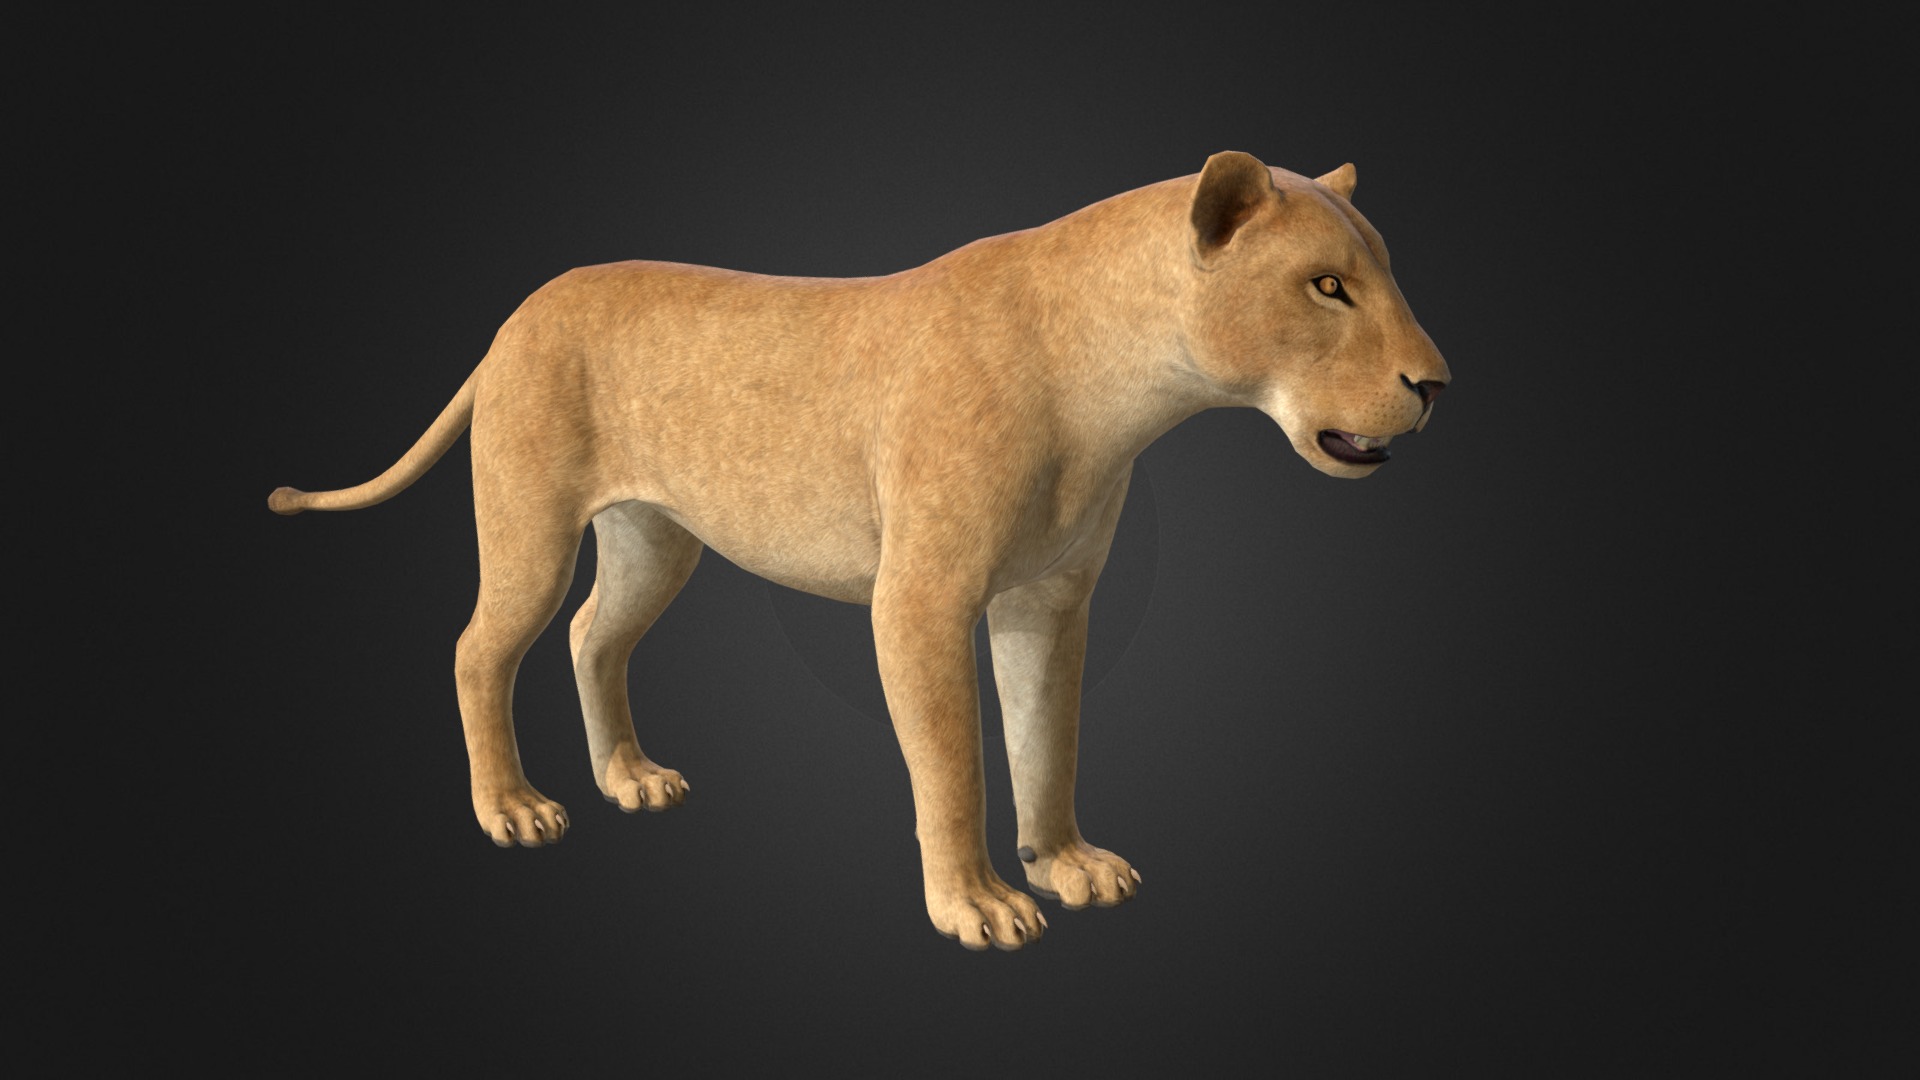 3D model 3D Lioness - This is a 3D model of the 3D Lioness. The 3D model is about a lion standing on a black background.